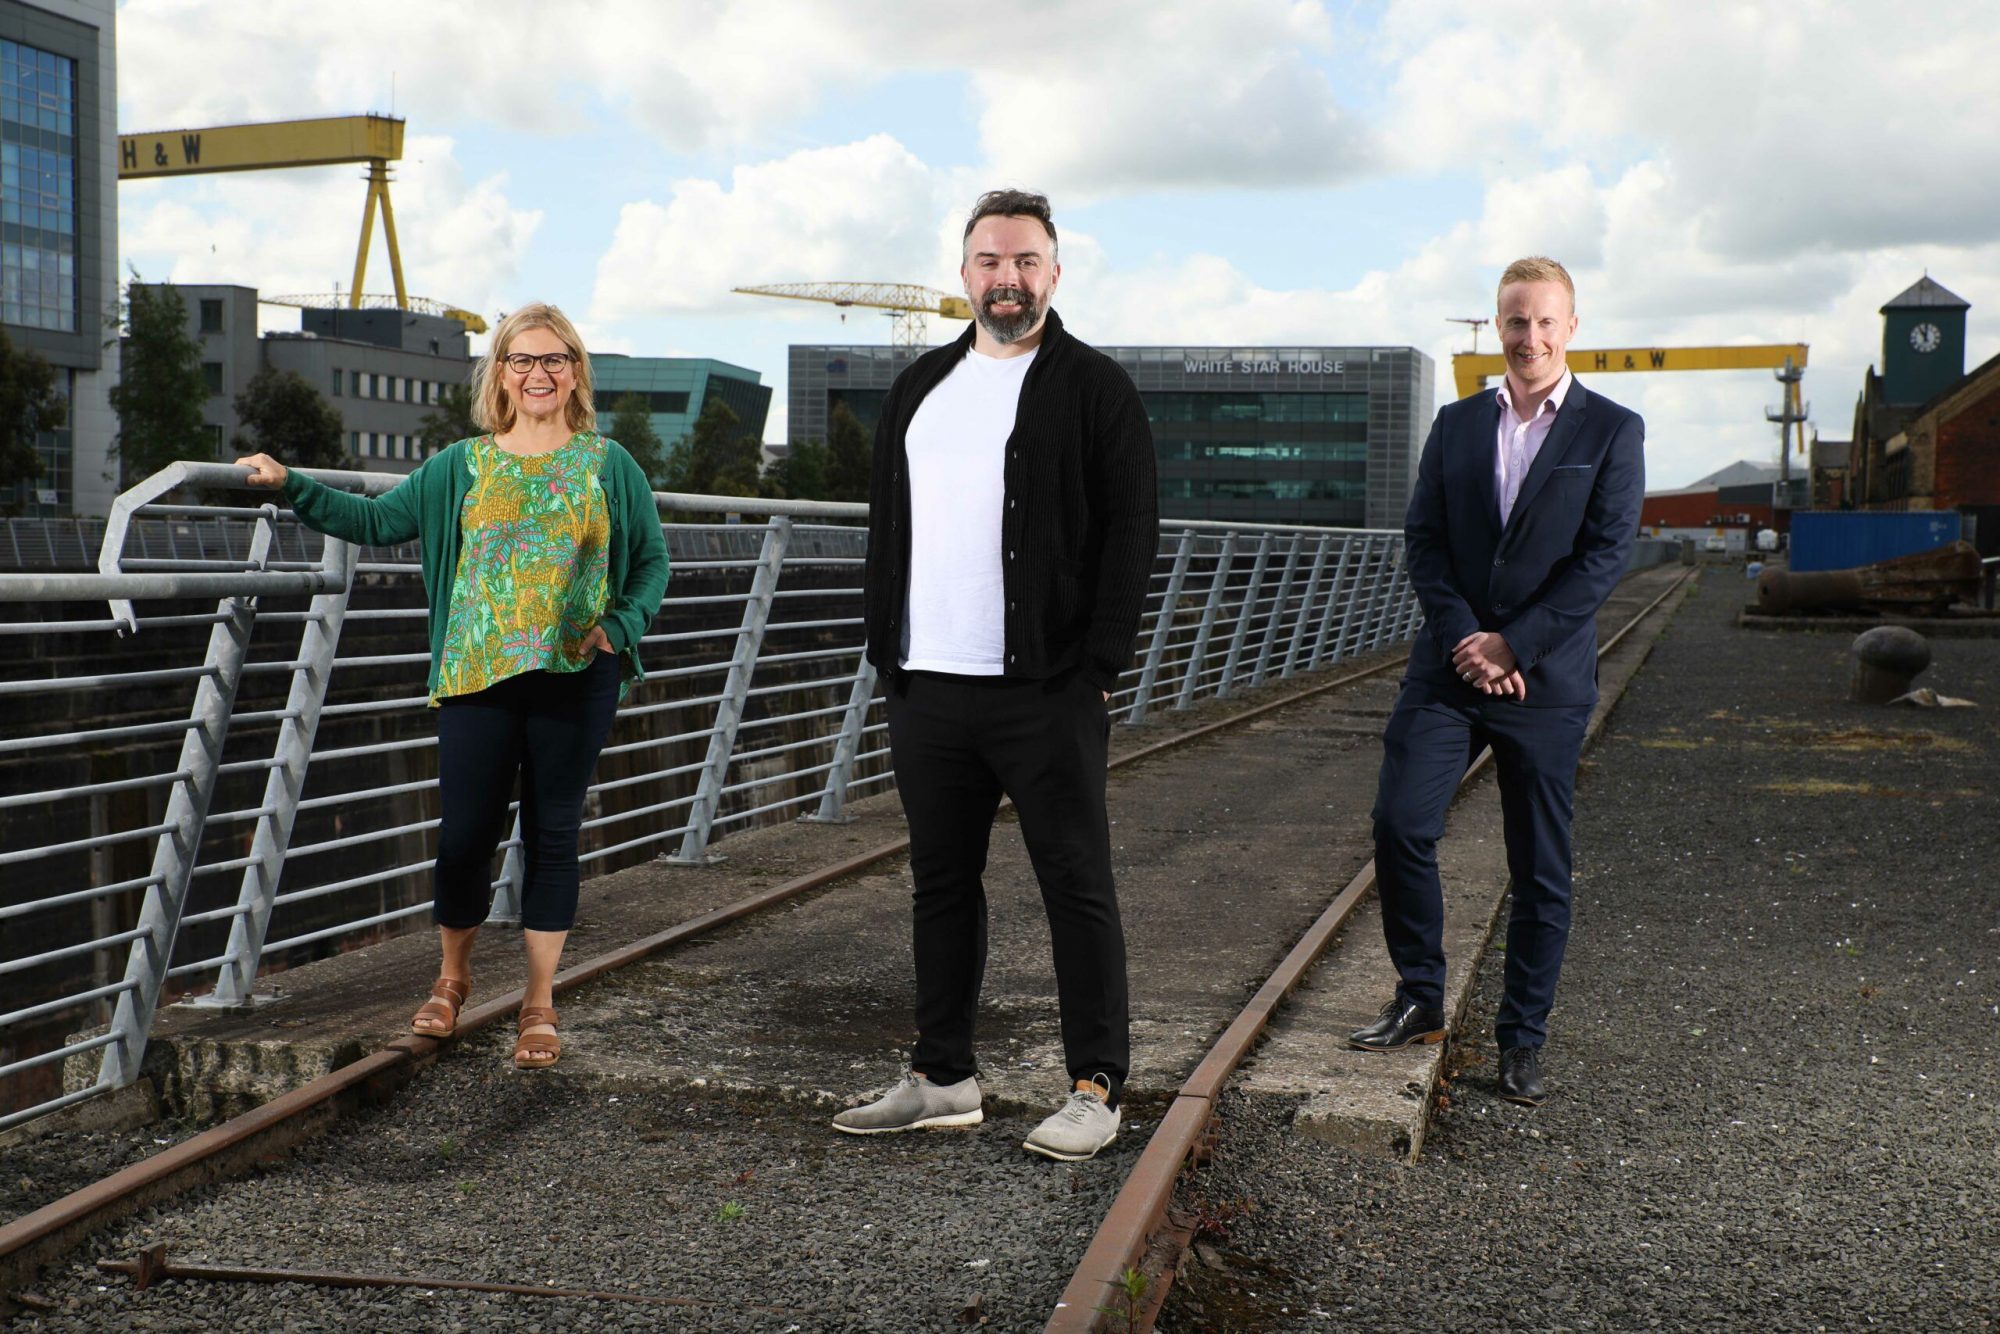 FINALISTS NAMED FOR NORTHERN IRELAND’S PREMIER INNOVATION COMPETITION INVENT 2021